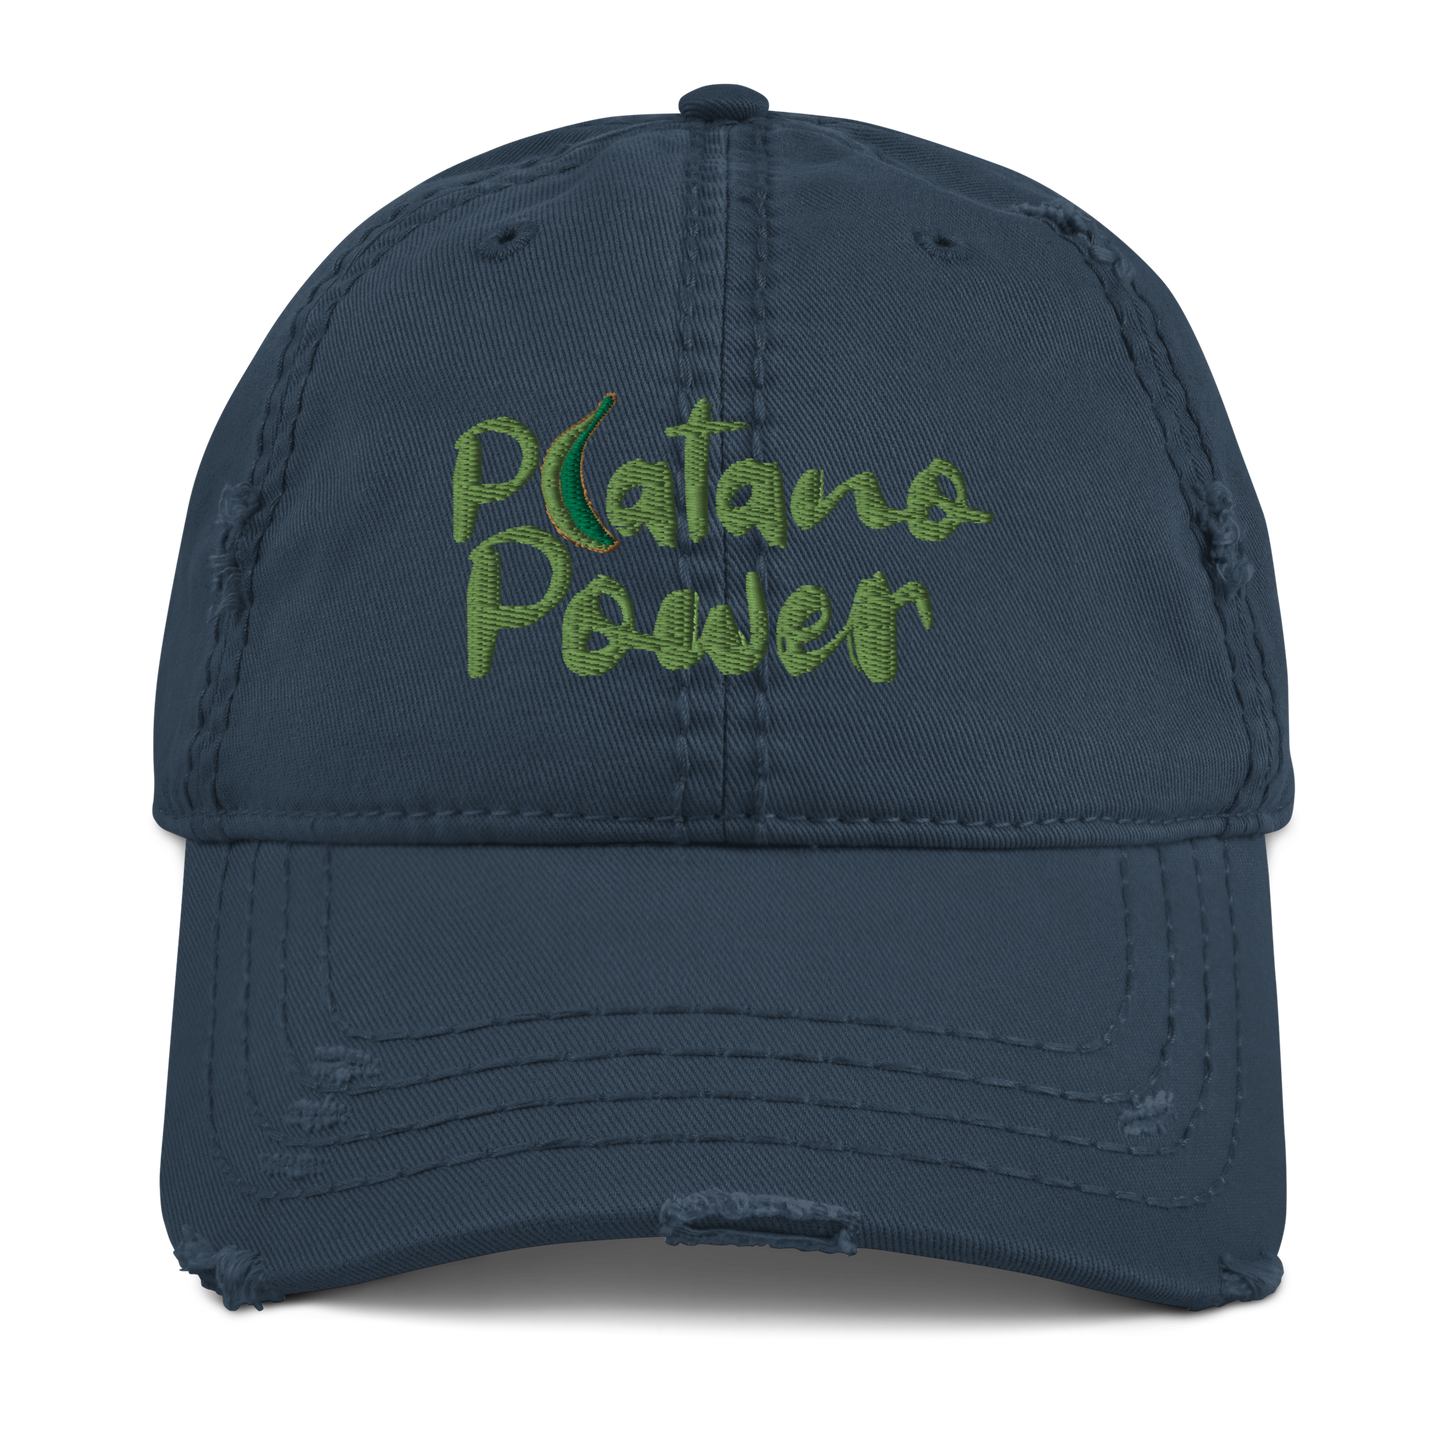 Dominican Platano Power Distressed Dad Hat